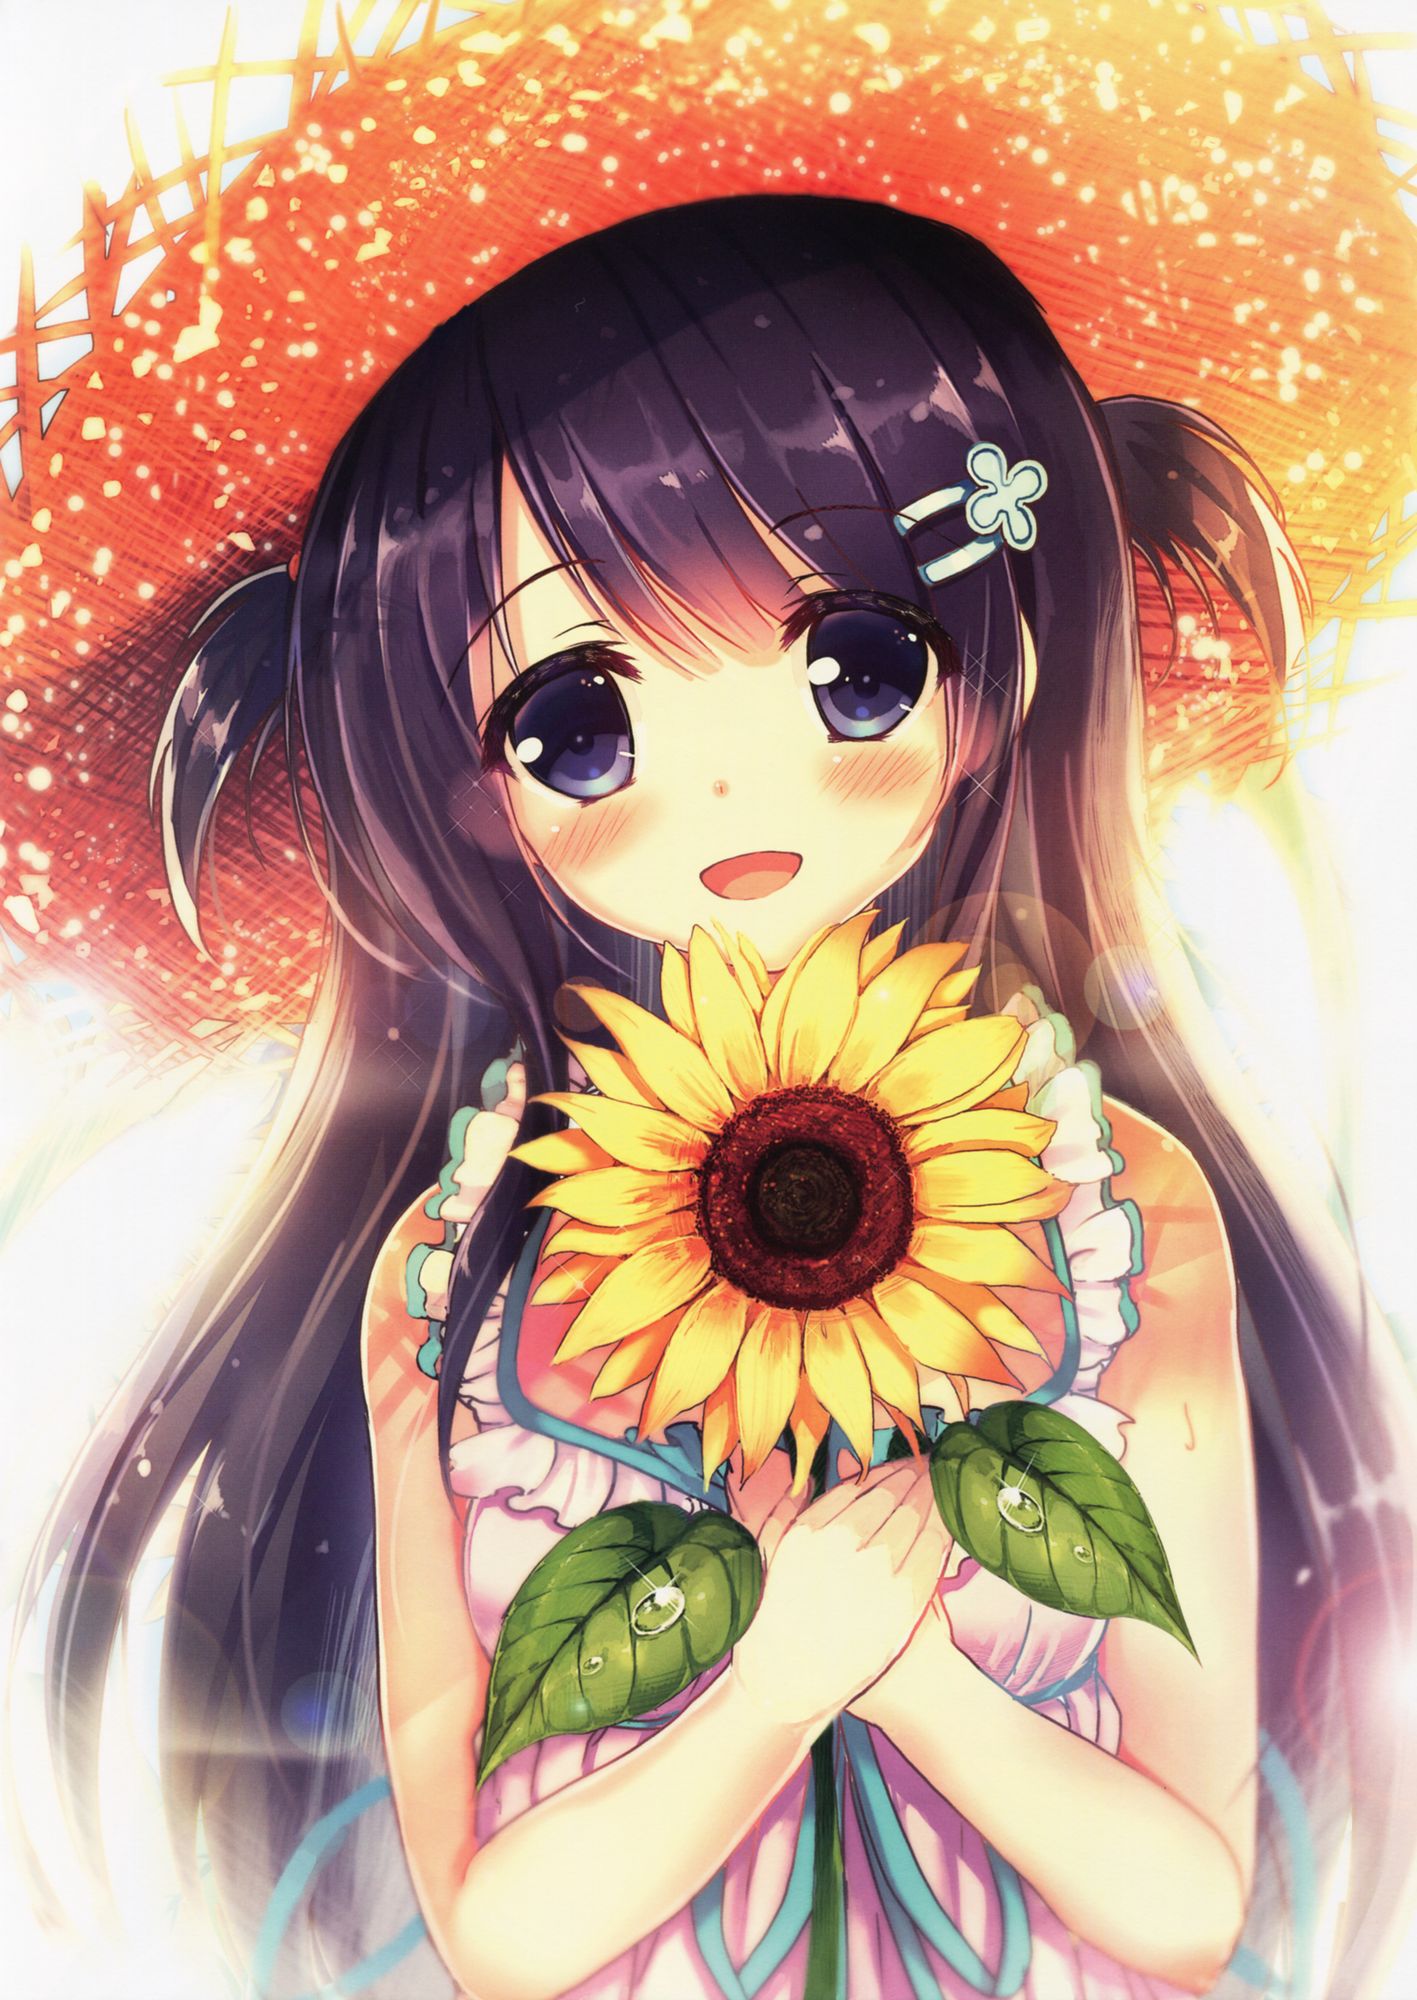 [Secondary, ZIP] summer 2: girl with a sunflower or image summary 38